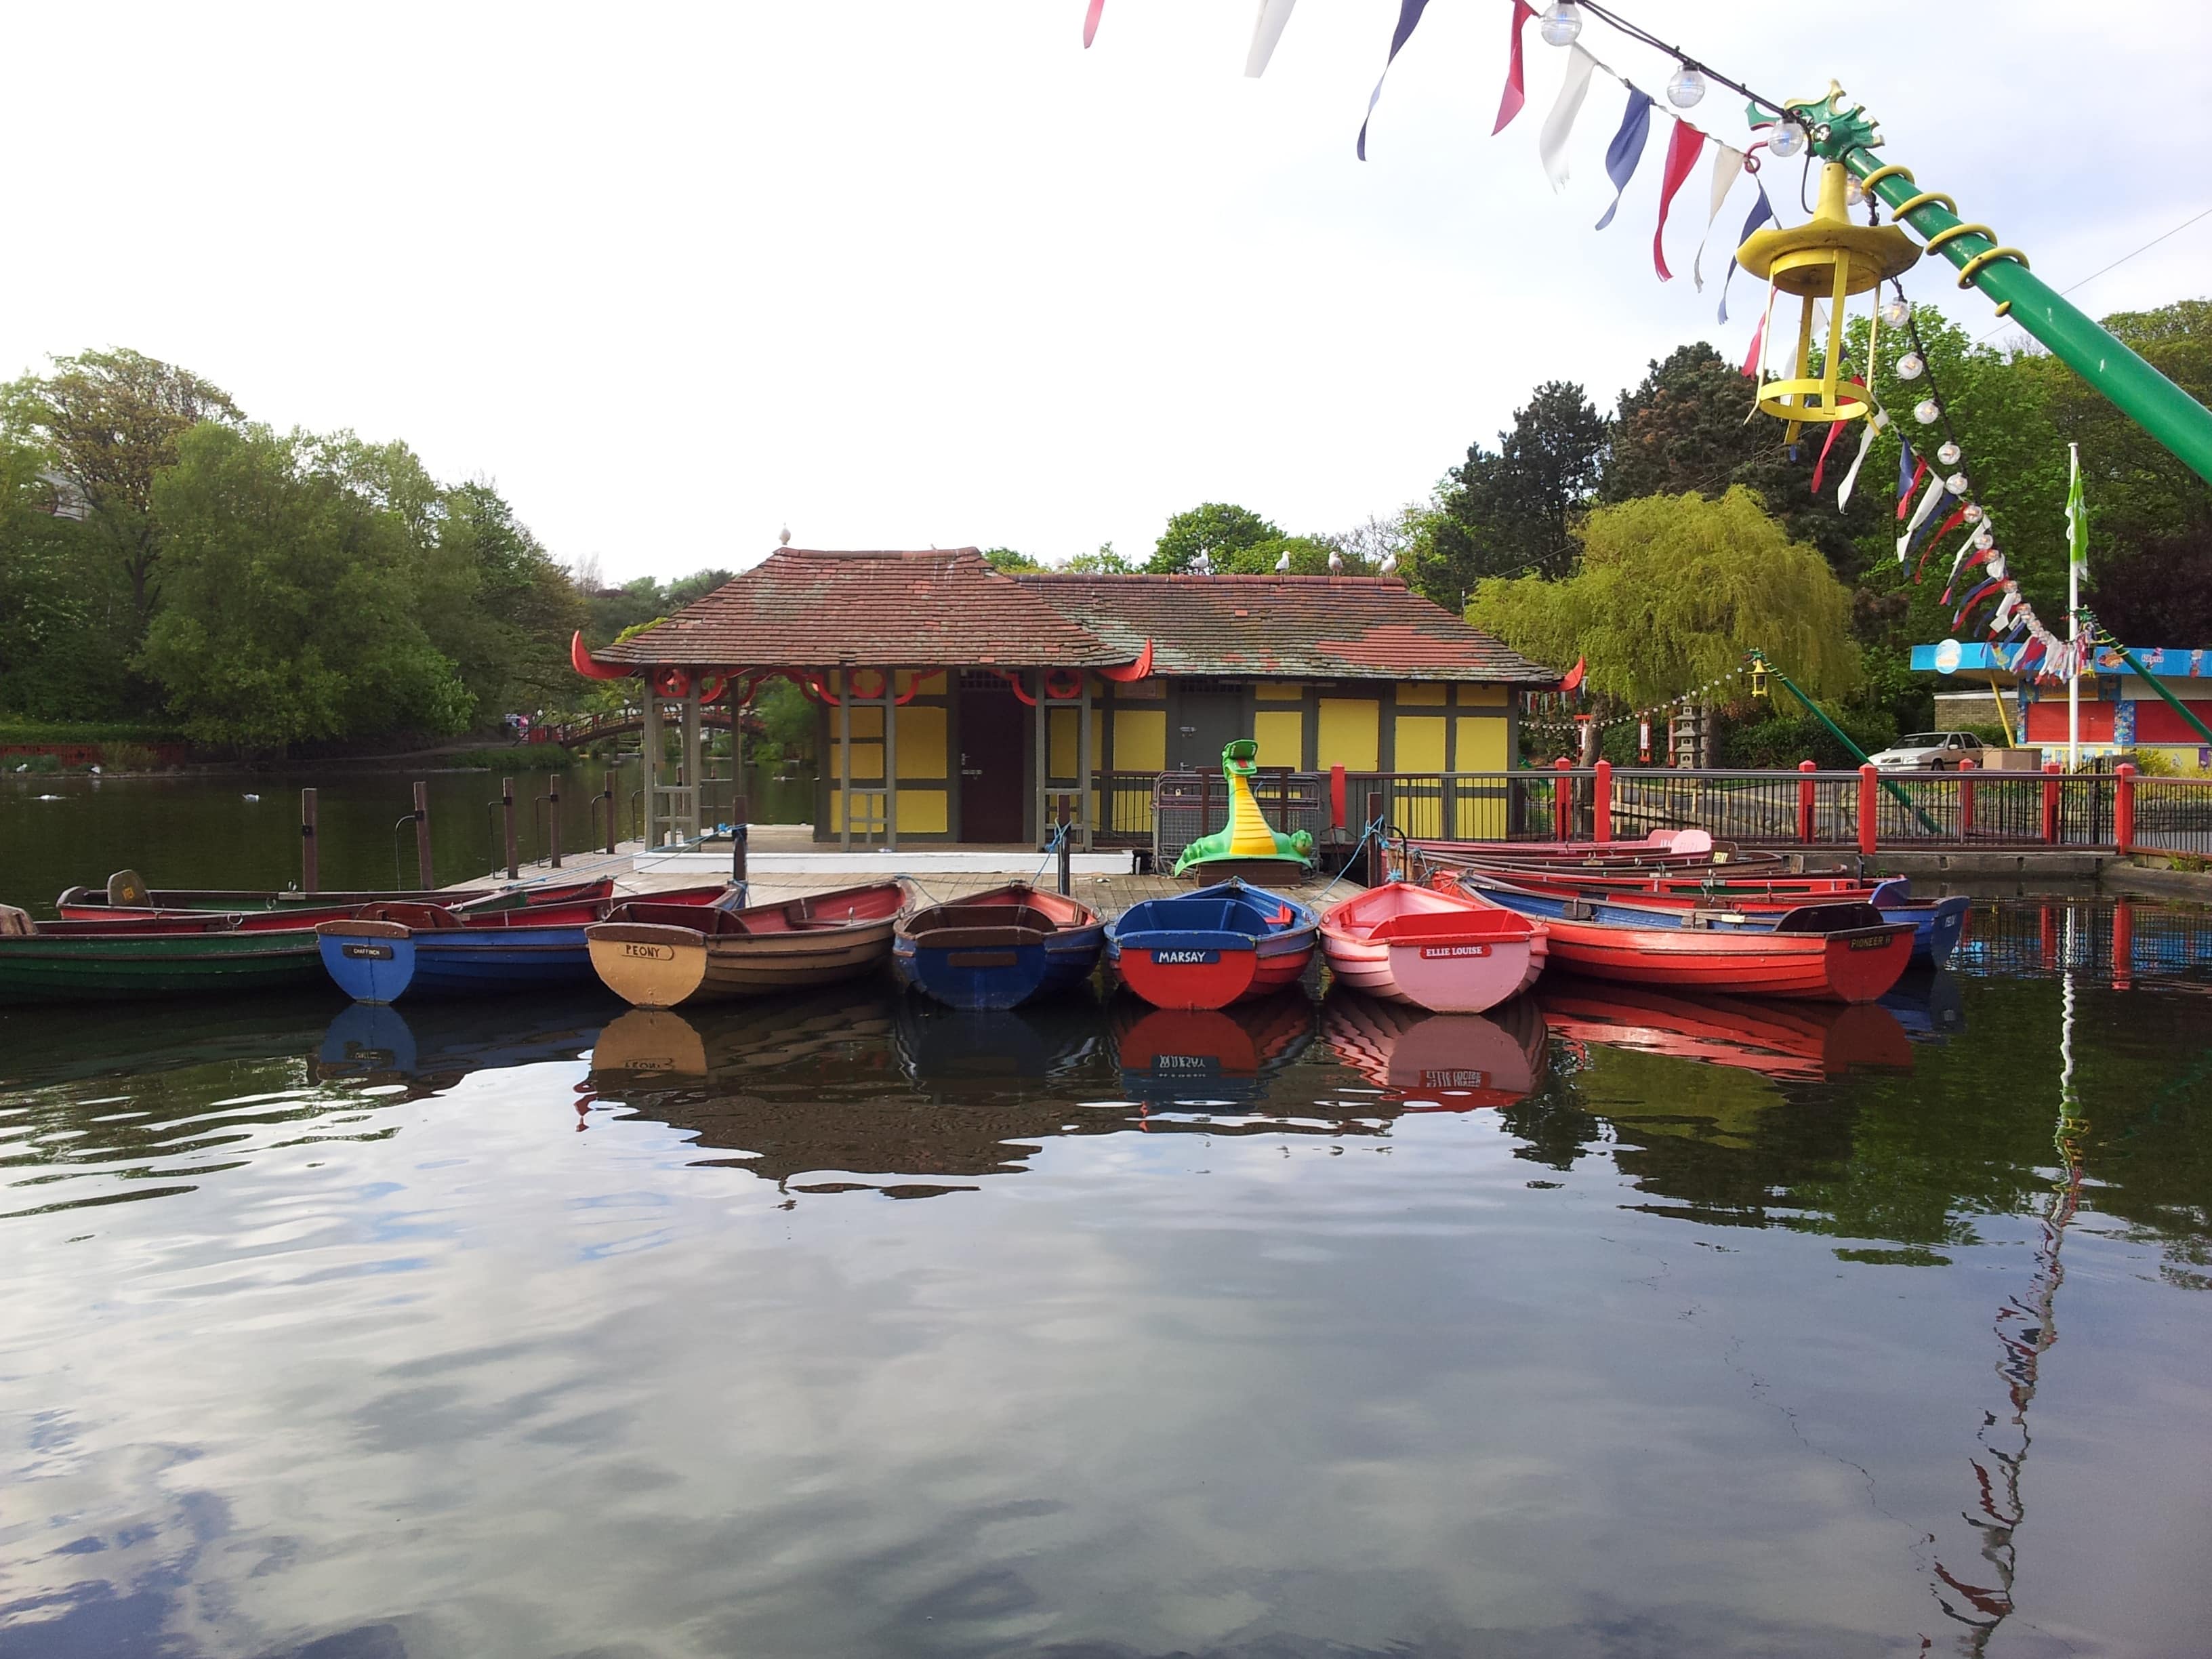 Treat the kids to a boat ride in Scarborough’s peaceful Peasholm Park